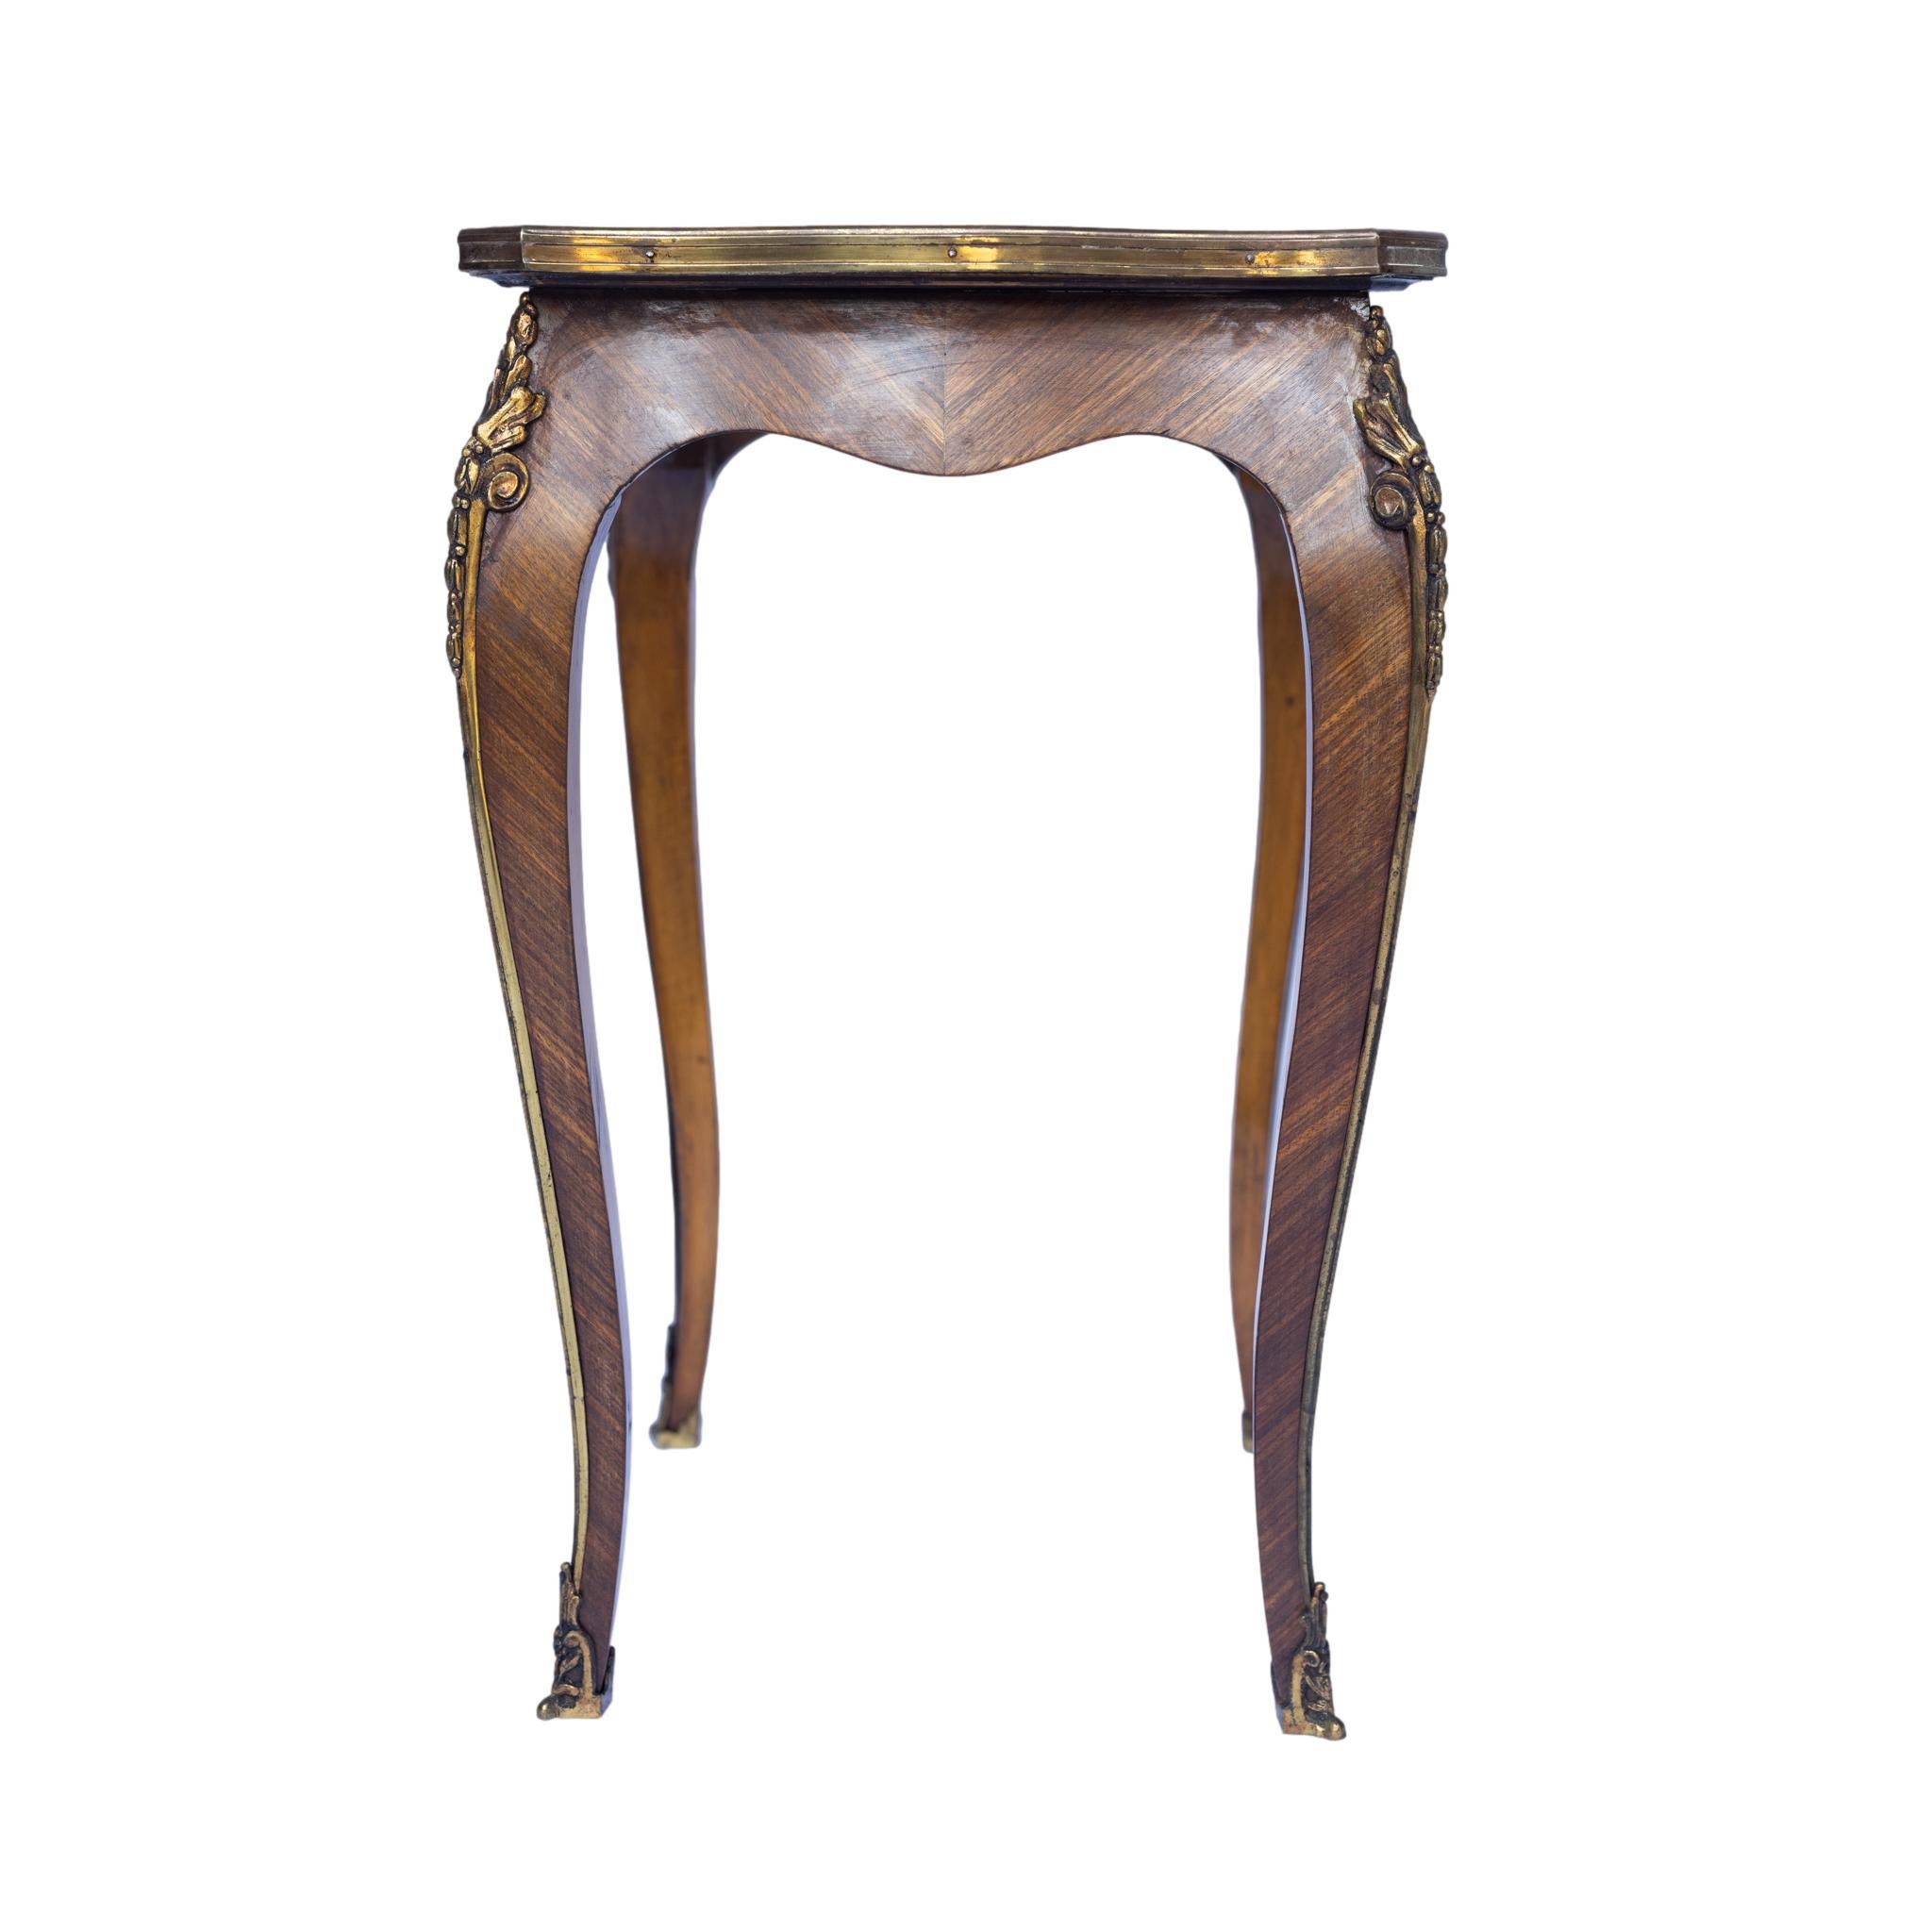 Set Three Louis XV-Style Kingwood and Parquetry Nesting Tables, French, c. 1880 For Sale 3